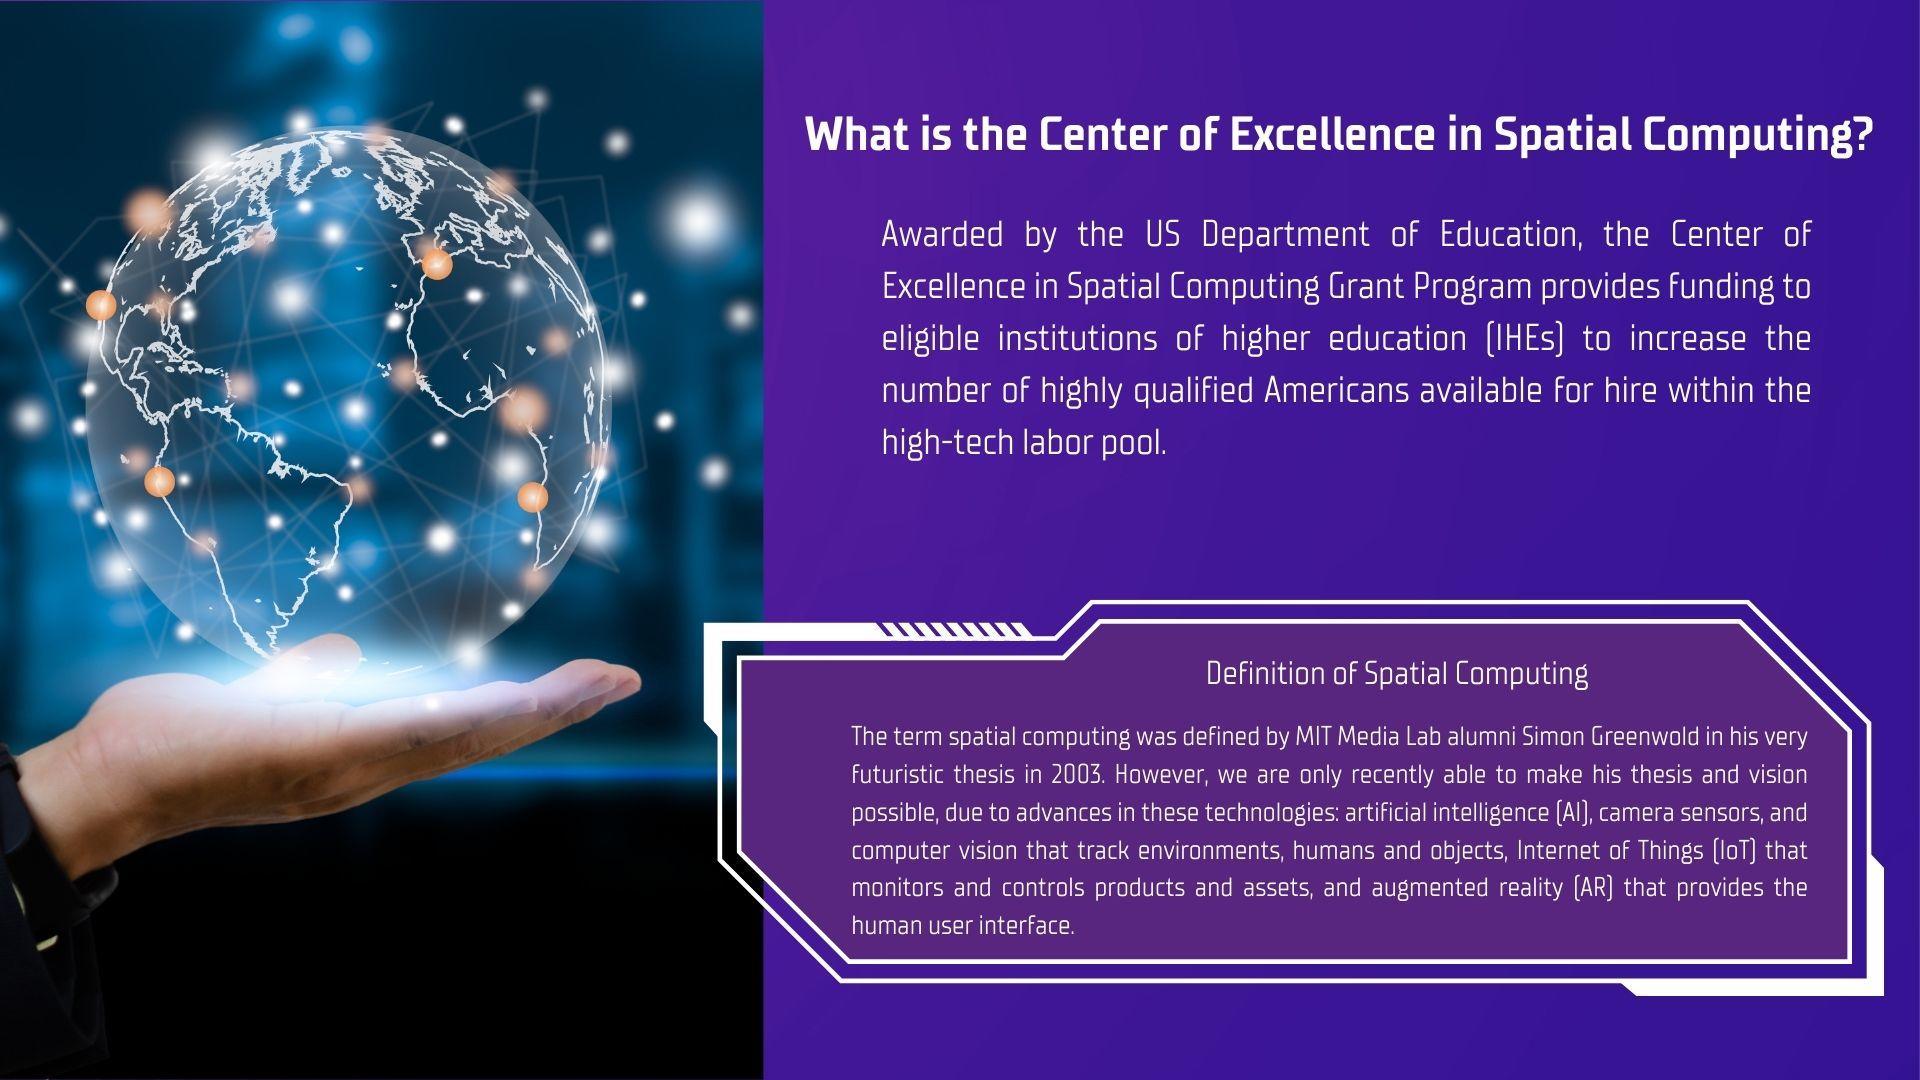 What is the center of excellence in spatial computing?  Awarded by the US Department of Education, the center of excellence in spatial computing grant program provides funding to eligible institutions of higher education to increase the number of highly qualified americans available for hire within the high-tech labor pool.  Definition of spatial computing.  The term spatial computing was definded by MIT Media Lab alumni Simon Greenwald in his futuristic thesis in 2003.  However, we are only recently able to make his thesis and vision possible, due to advances in these technologies; artificial intelligence, camera sensors, and computer vision that track environments, humans an objects.  Internet of things that monitors and controls products and assets, and augmented reality that provides human user interface.